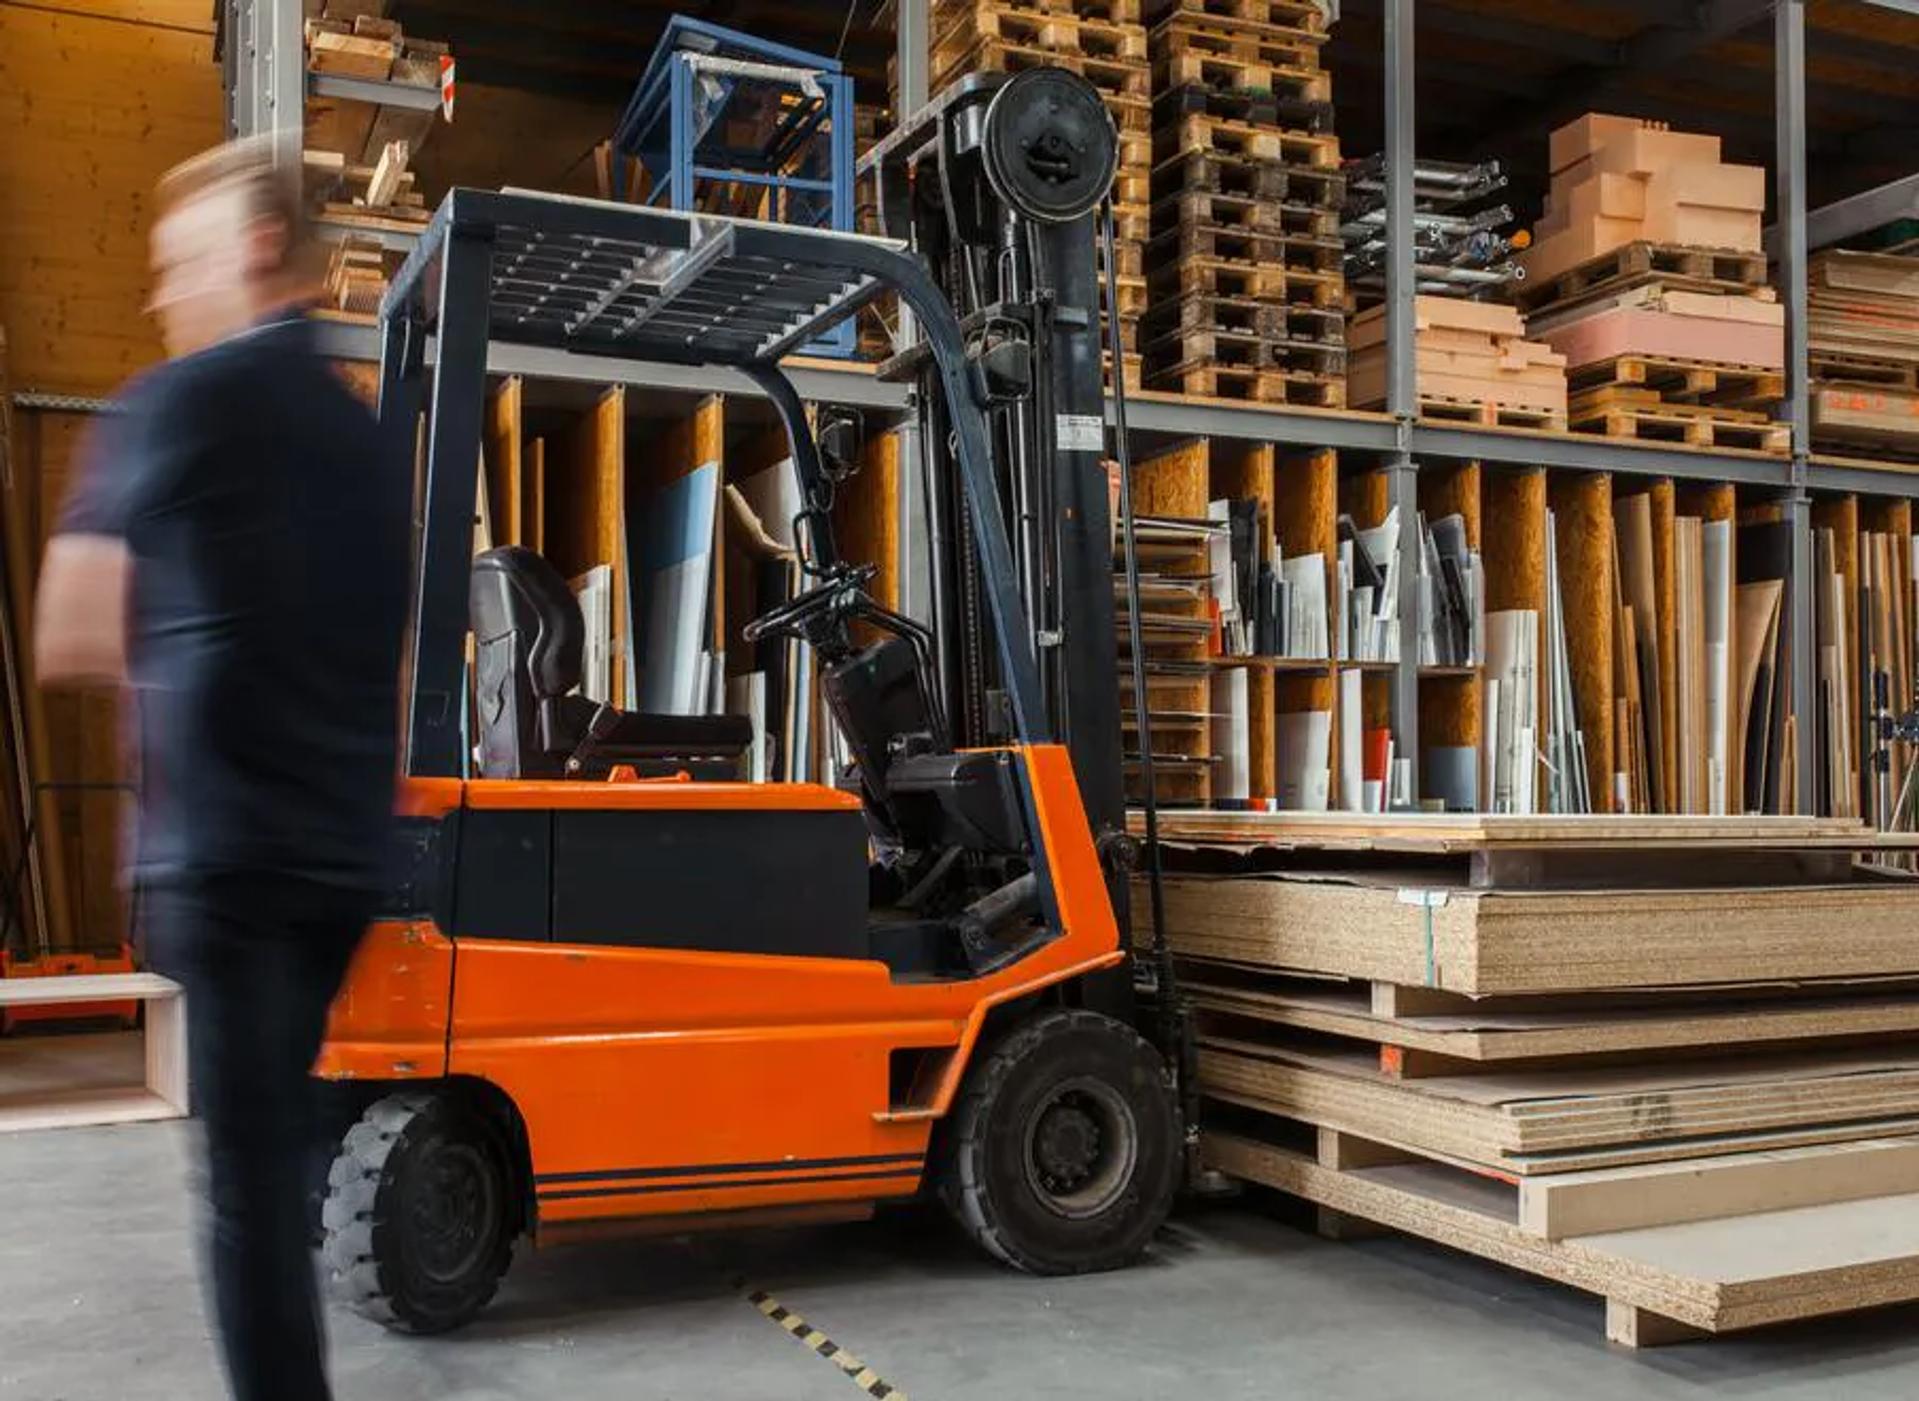 A forklift carrying stacks of wood in a warehouse